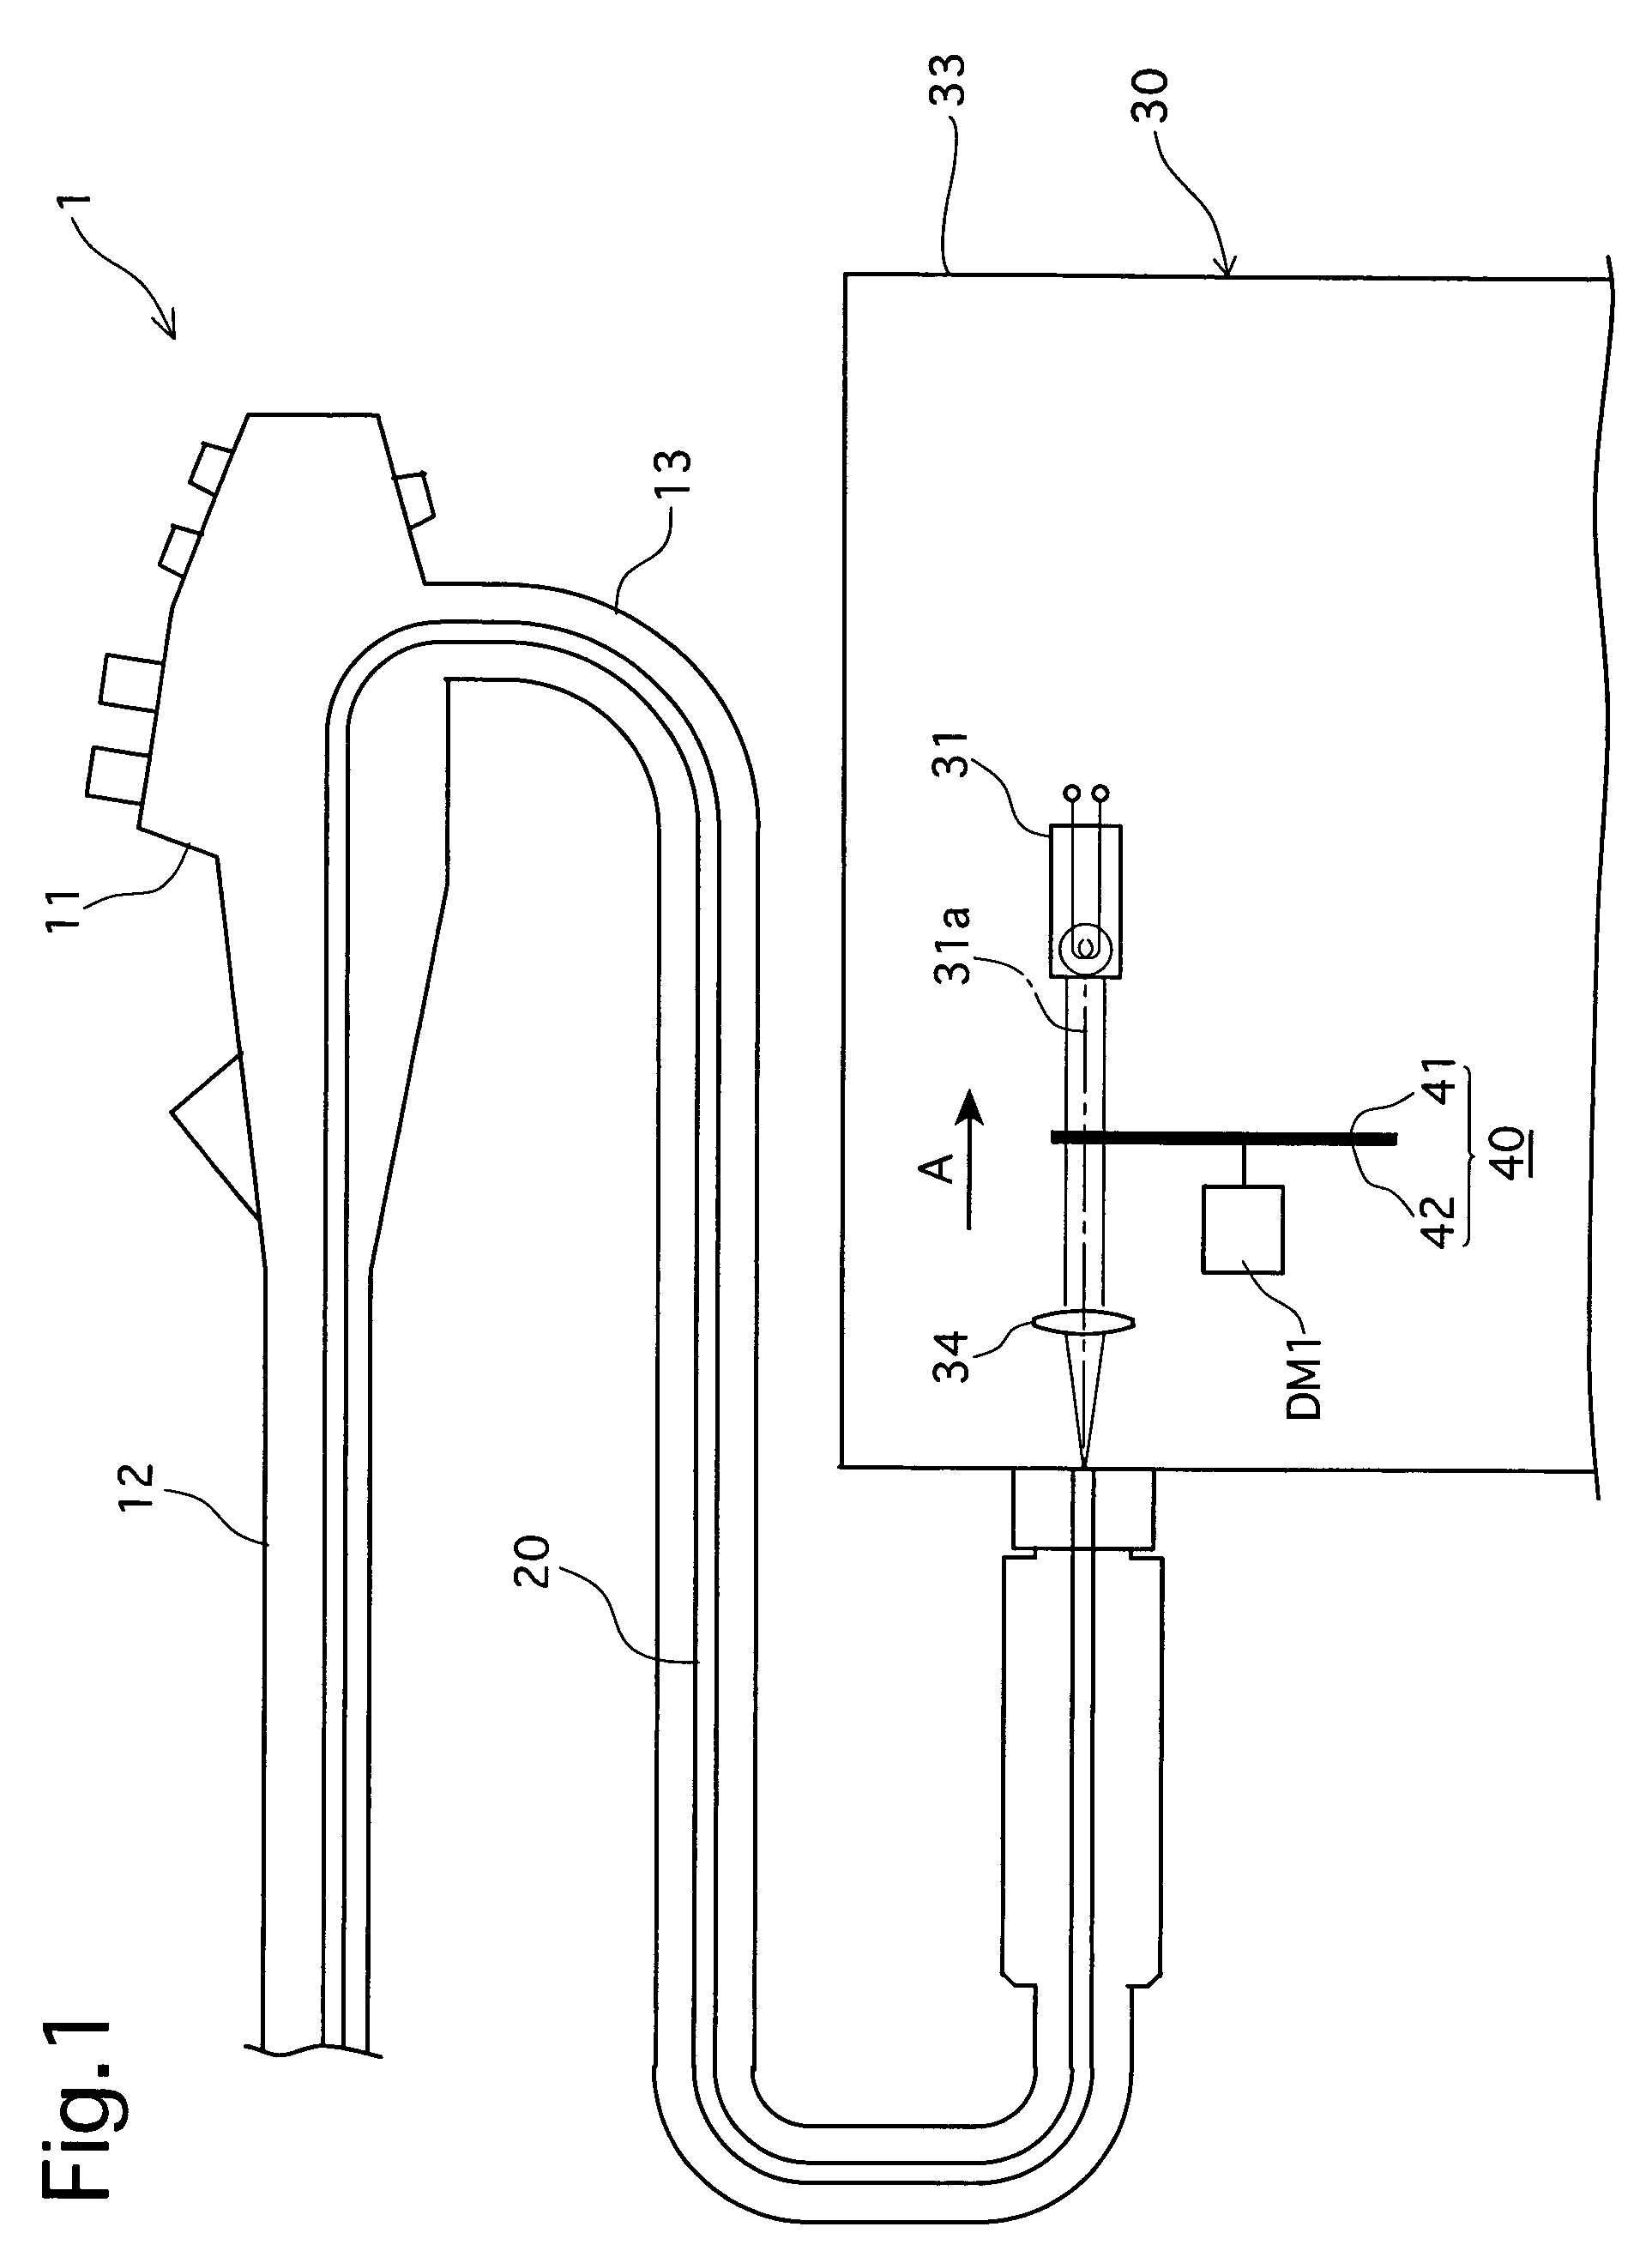 Light source apparatus for electronic endoscope and electronic endoscope having the light source apparatus